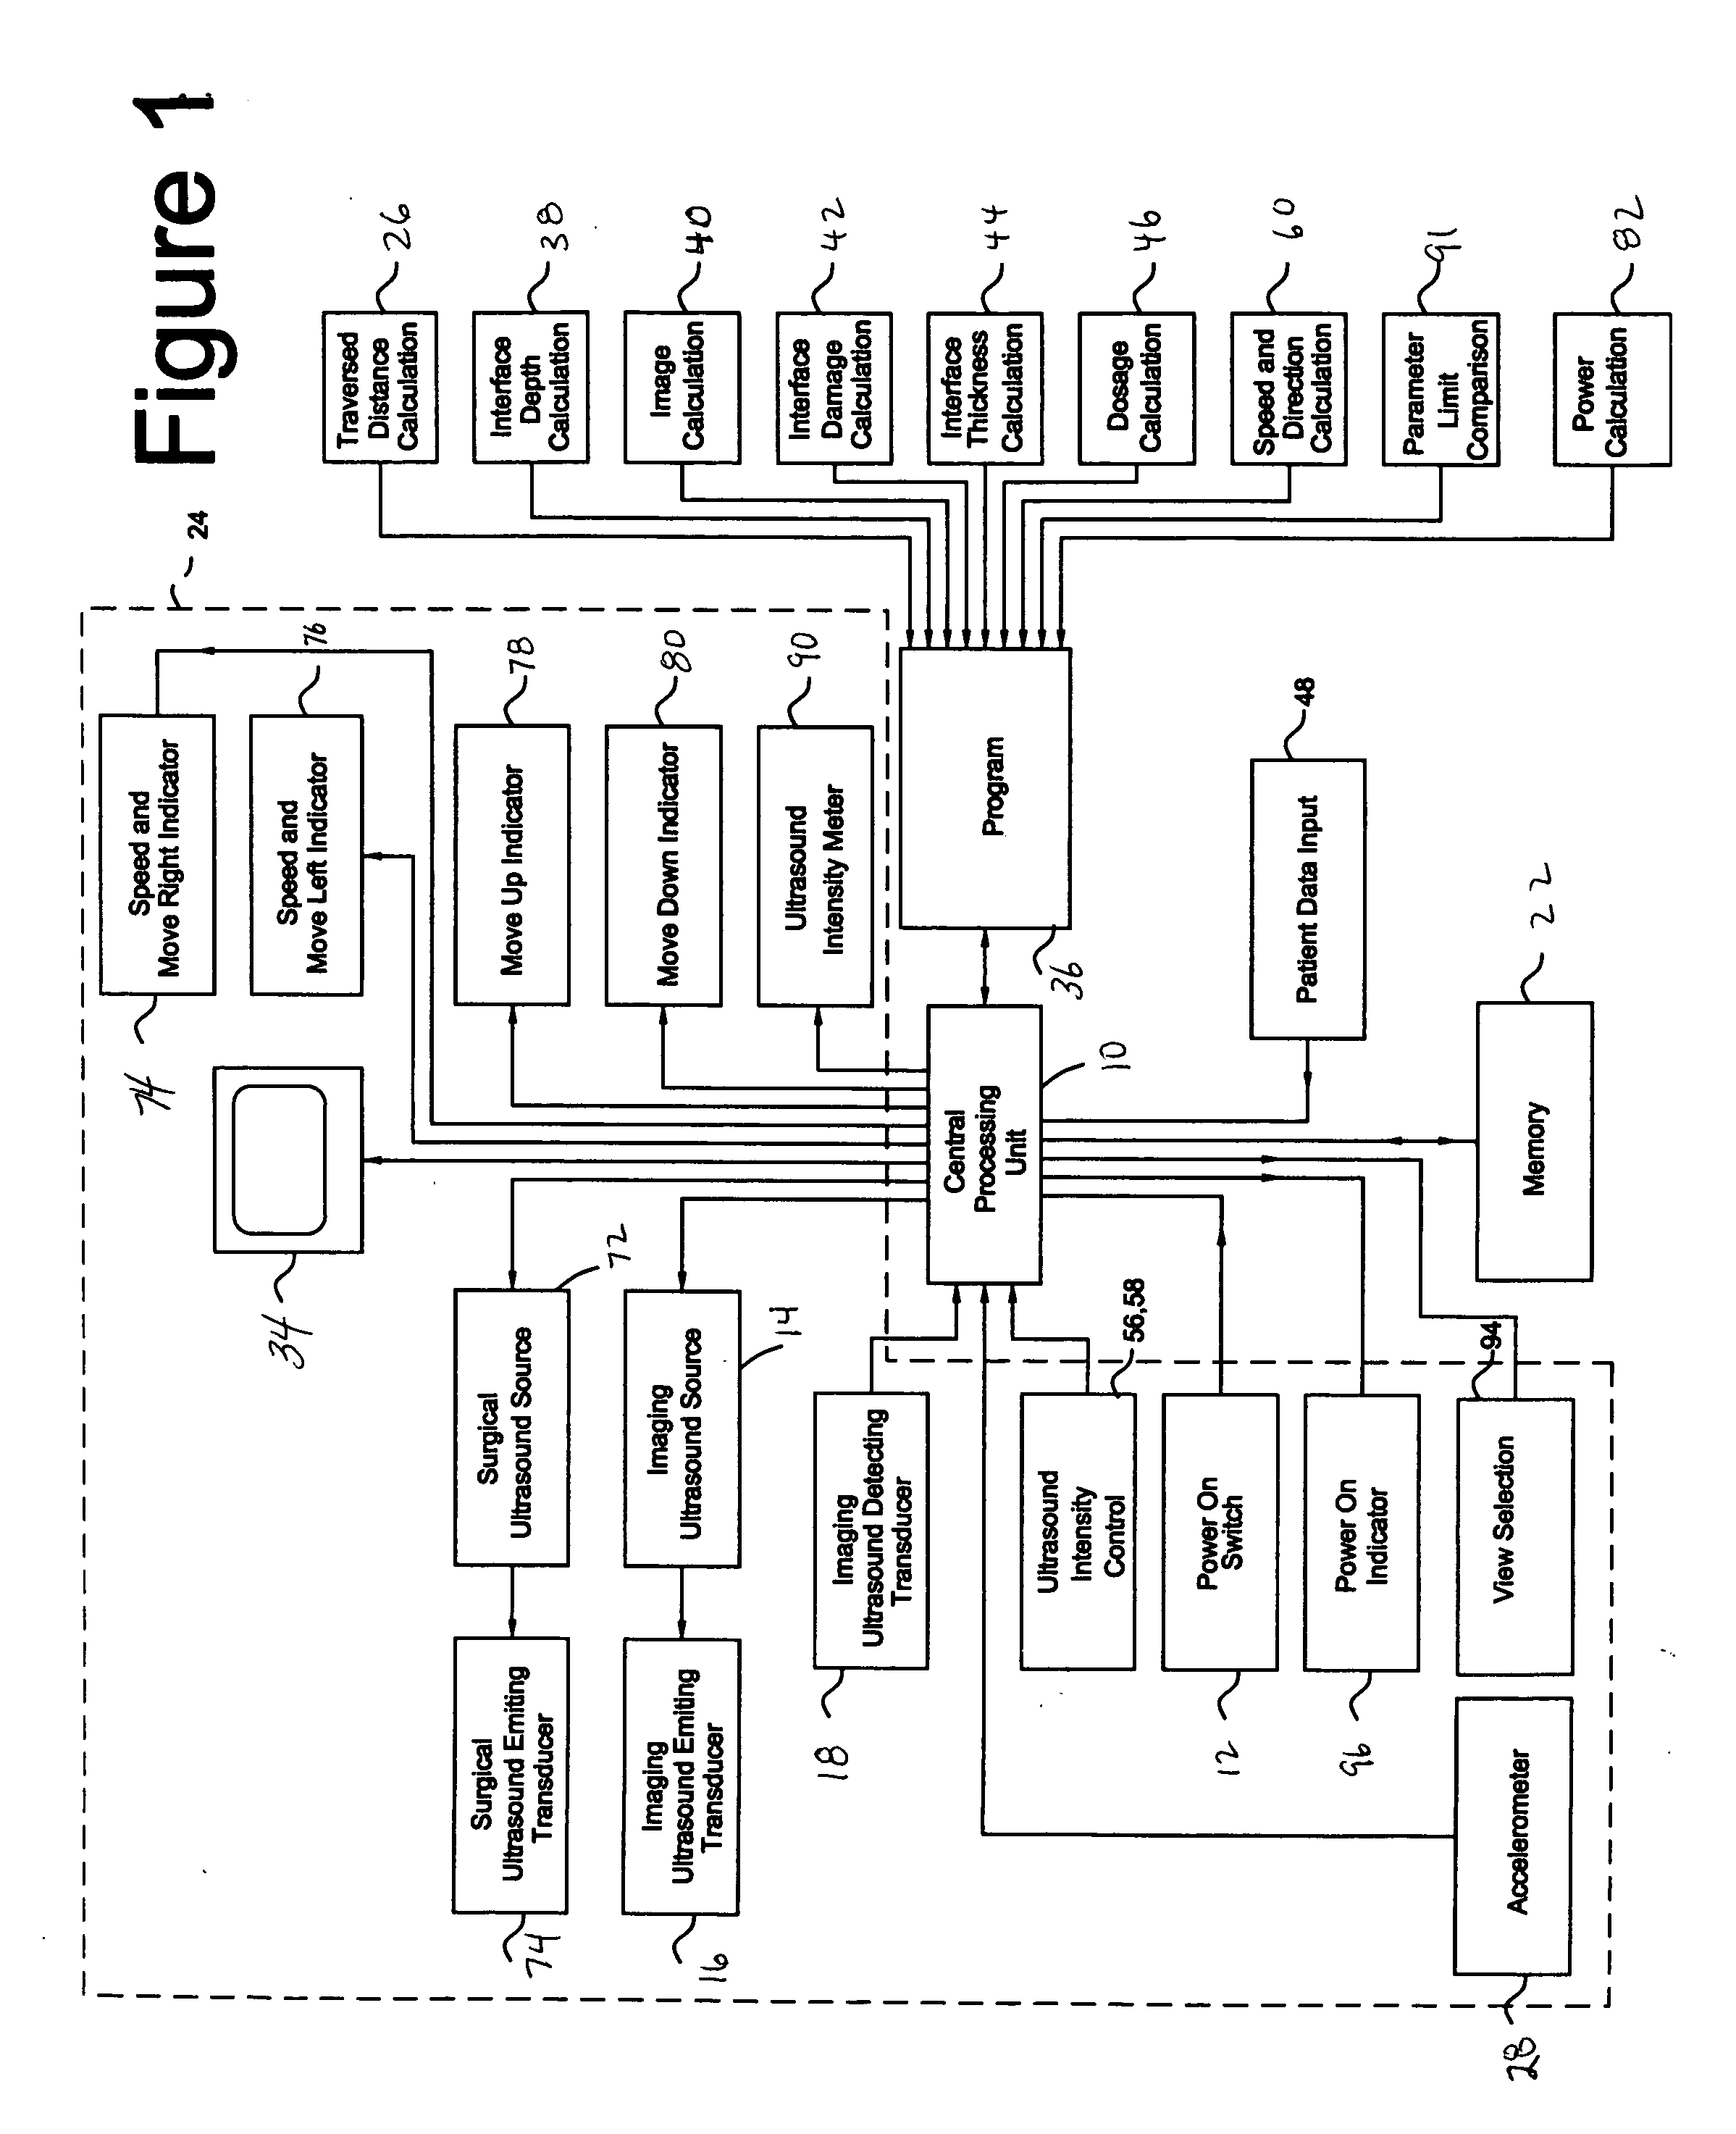 Ultrasound treatment and imaging system